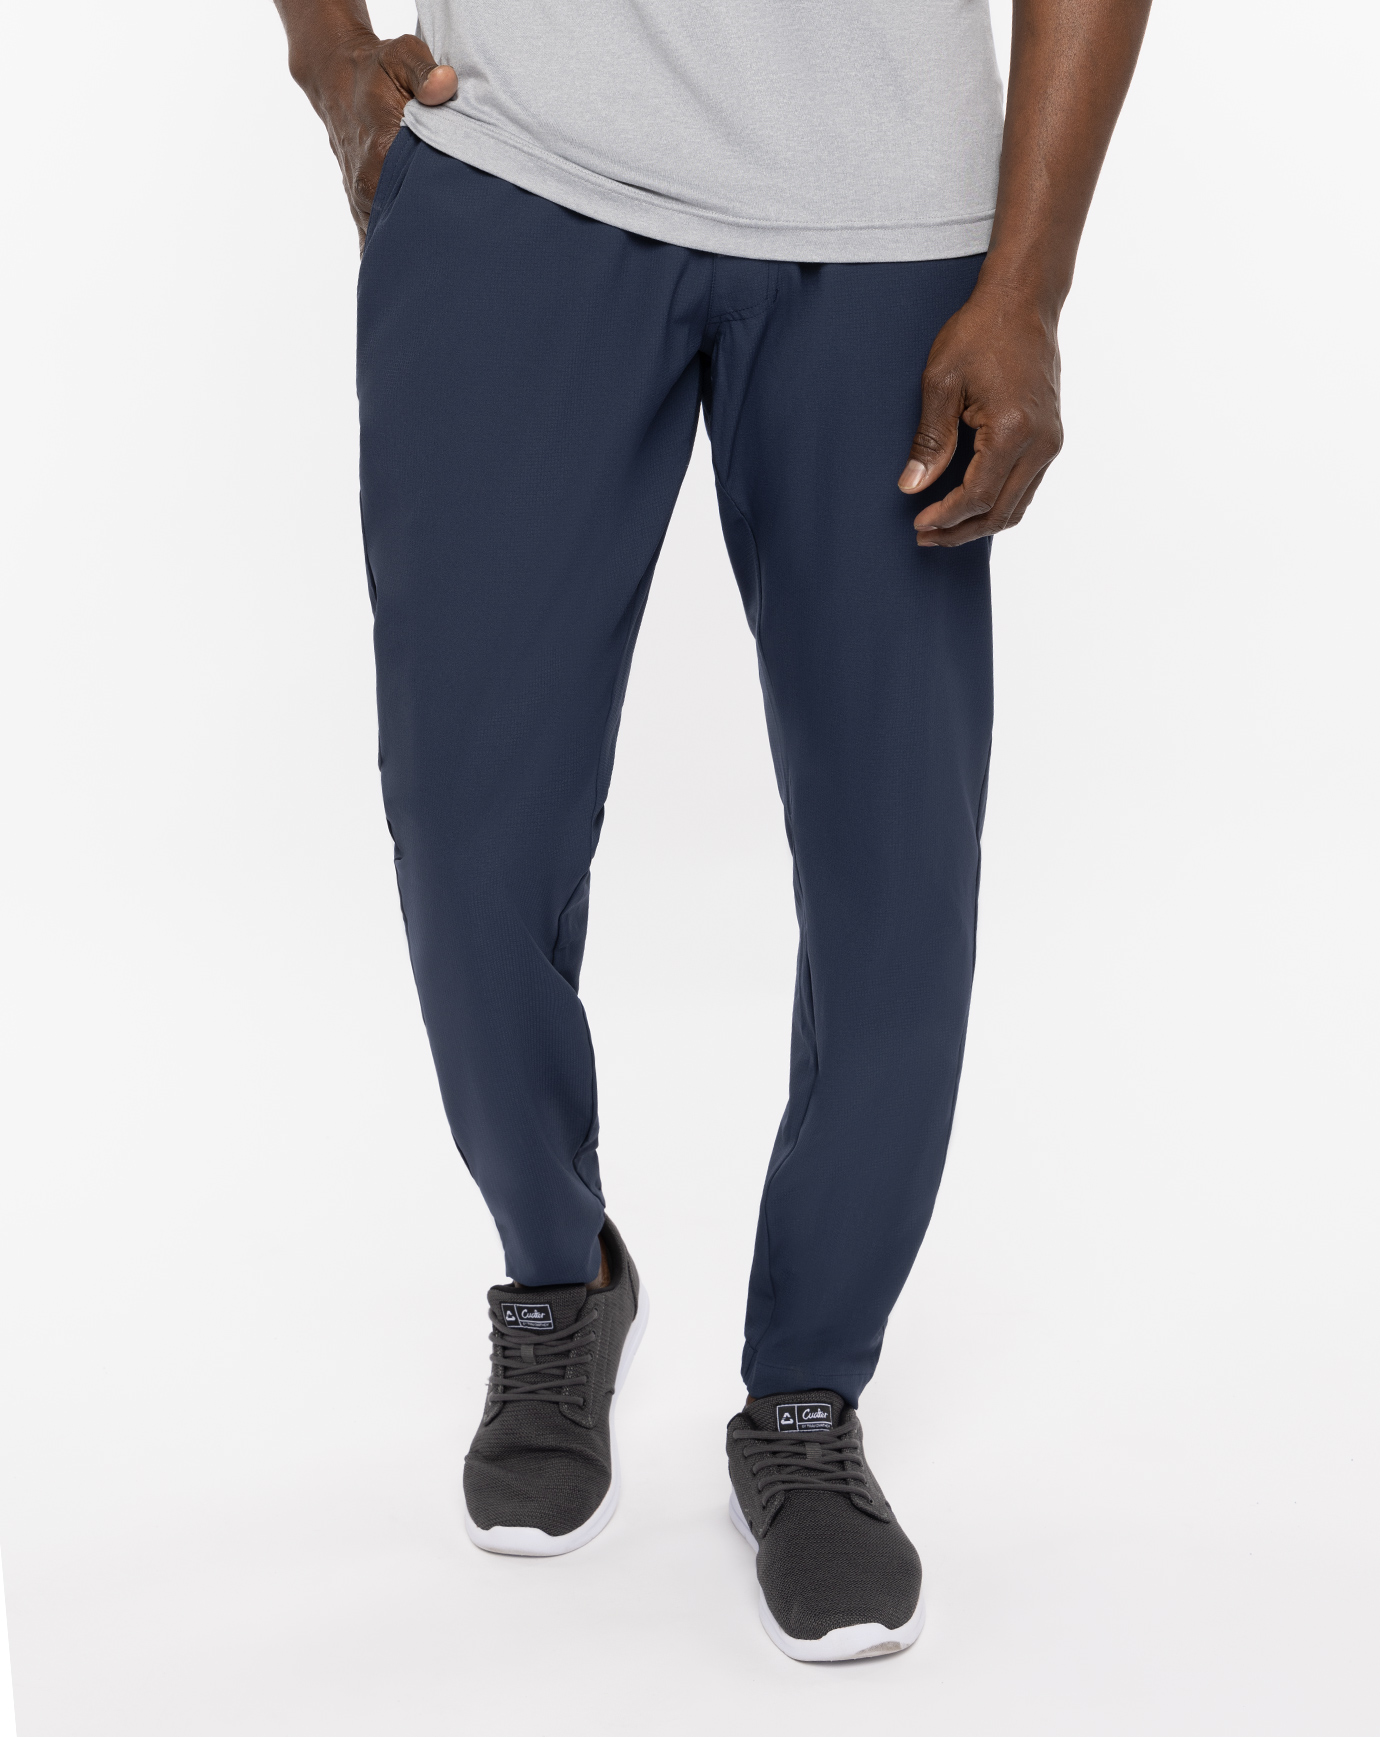 TRAVEL ACTIVE PANT 2.0